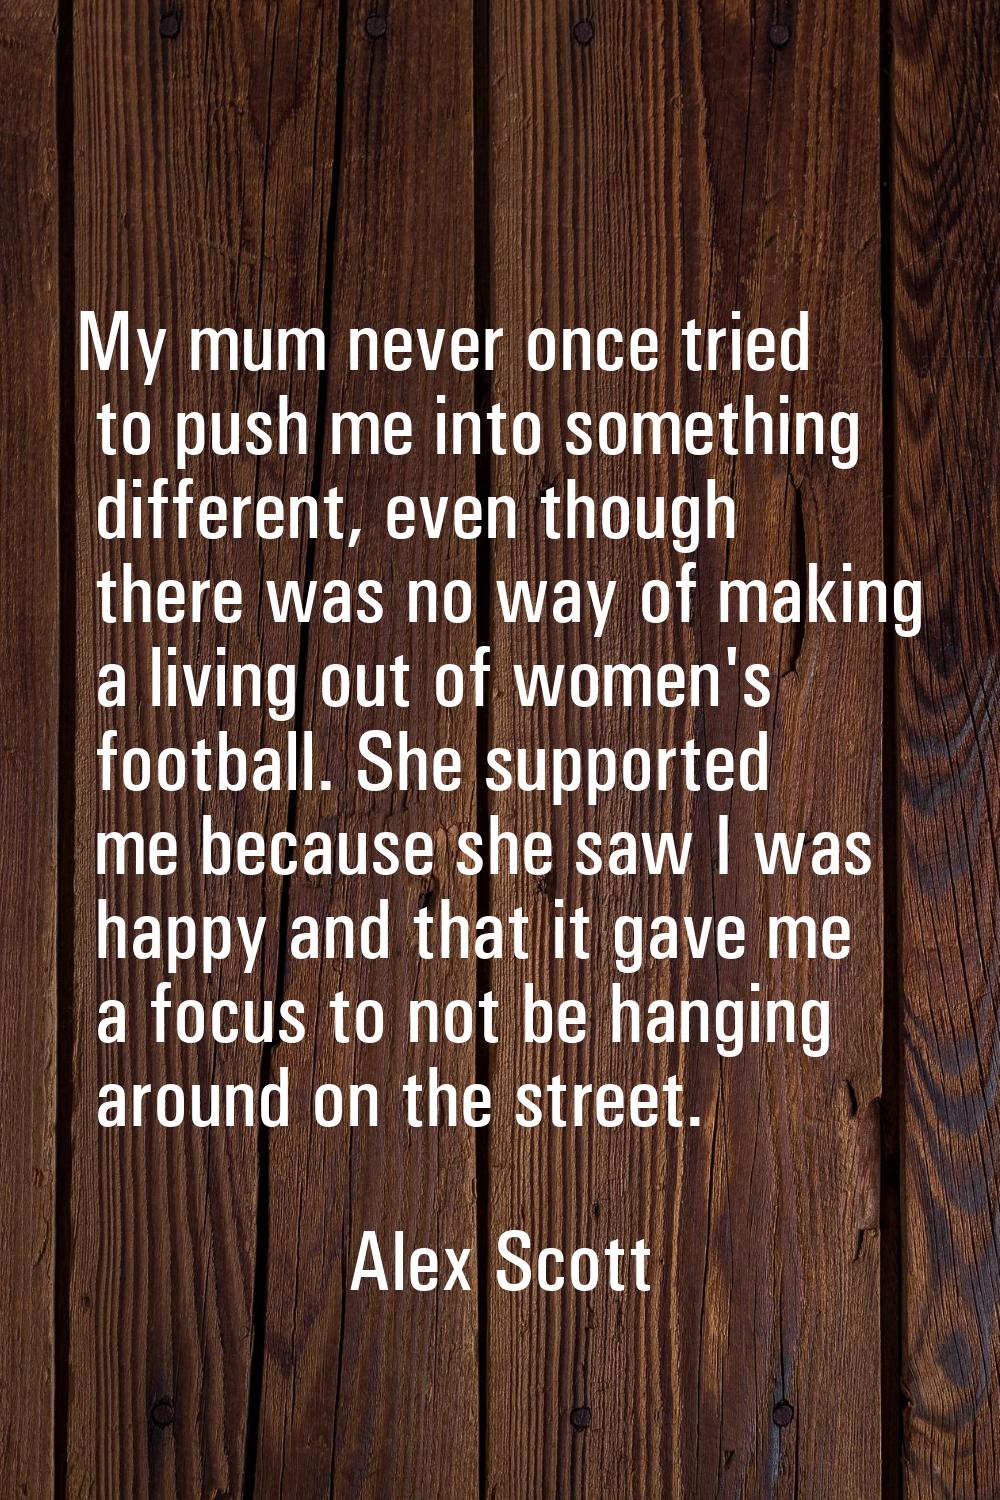 My mum never once tried to push me into something different, even though there was no way of making